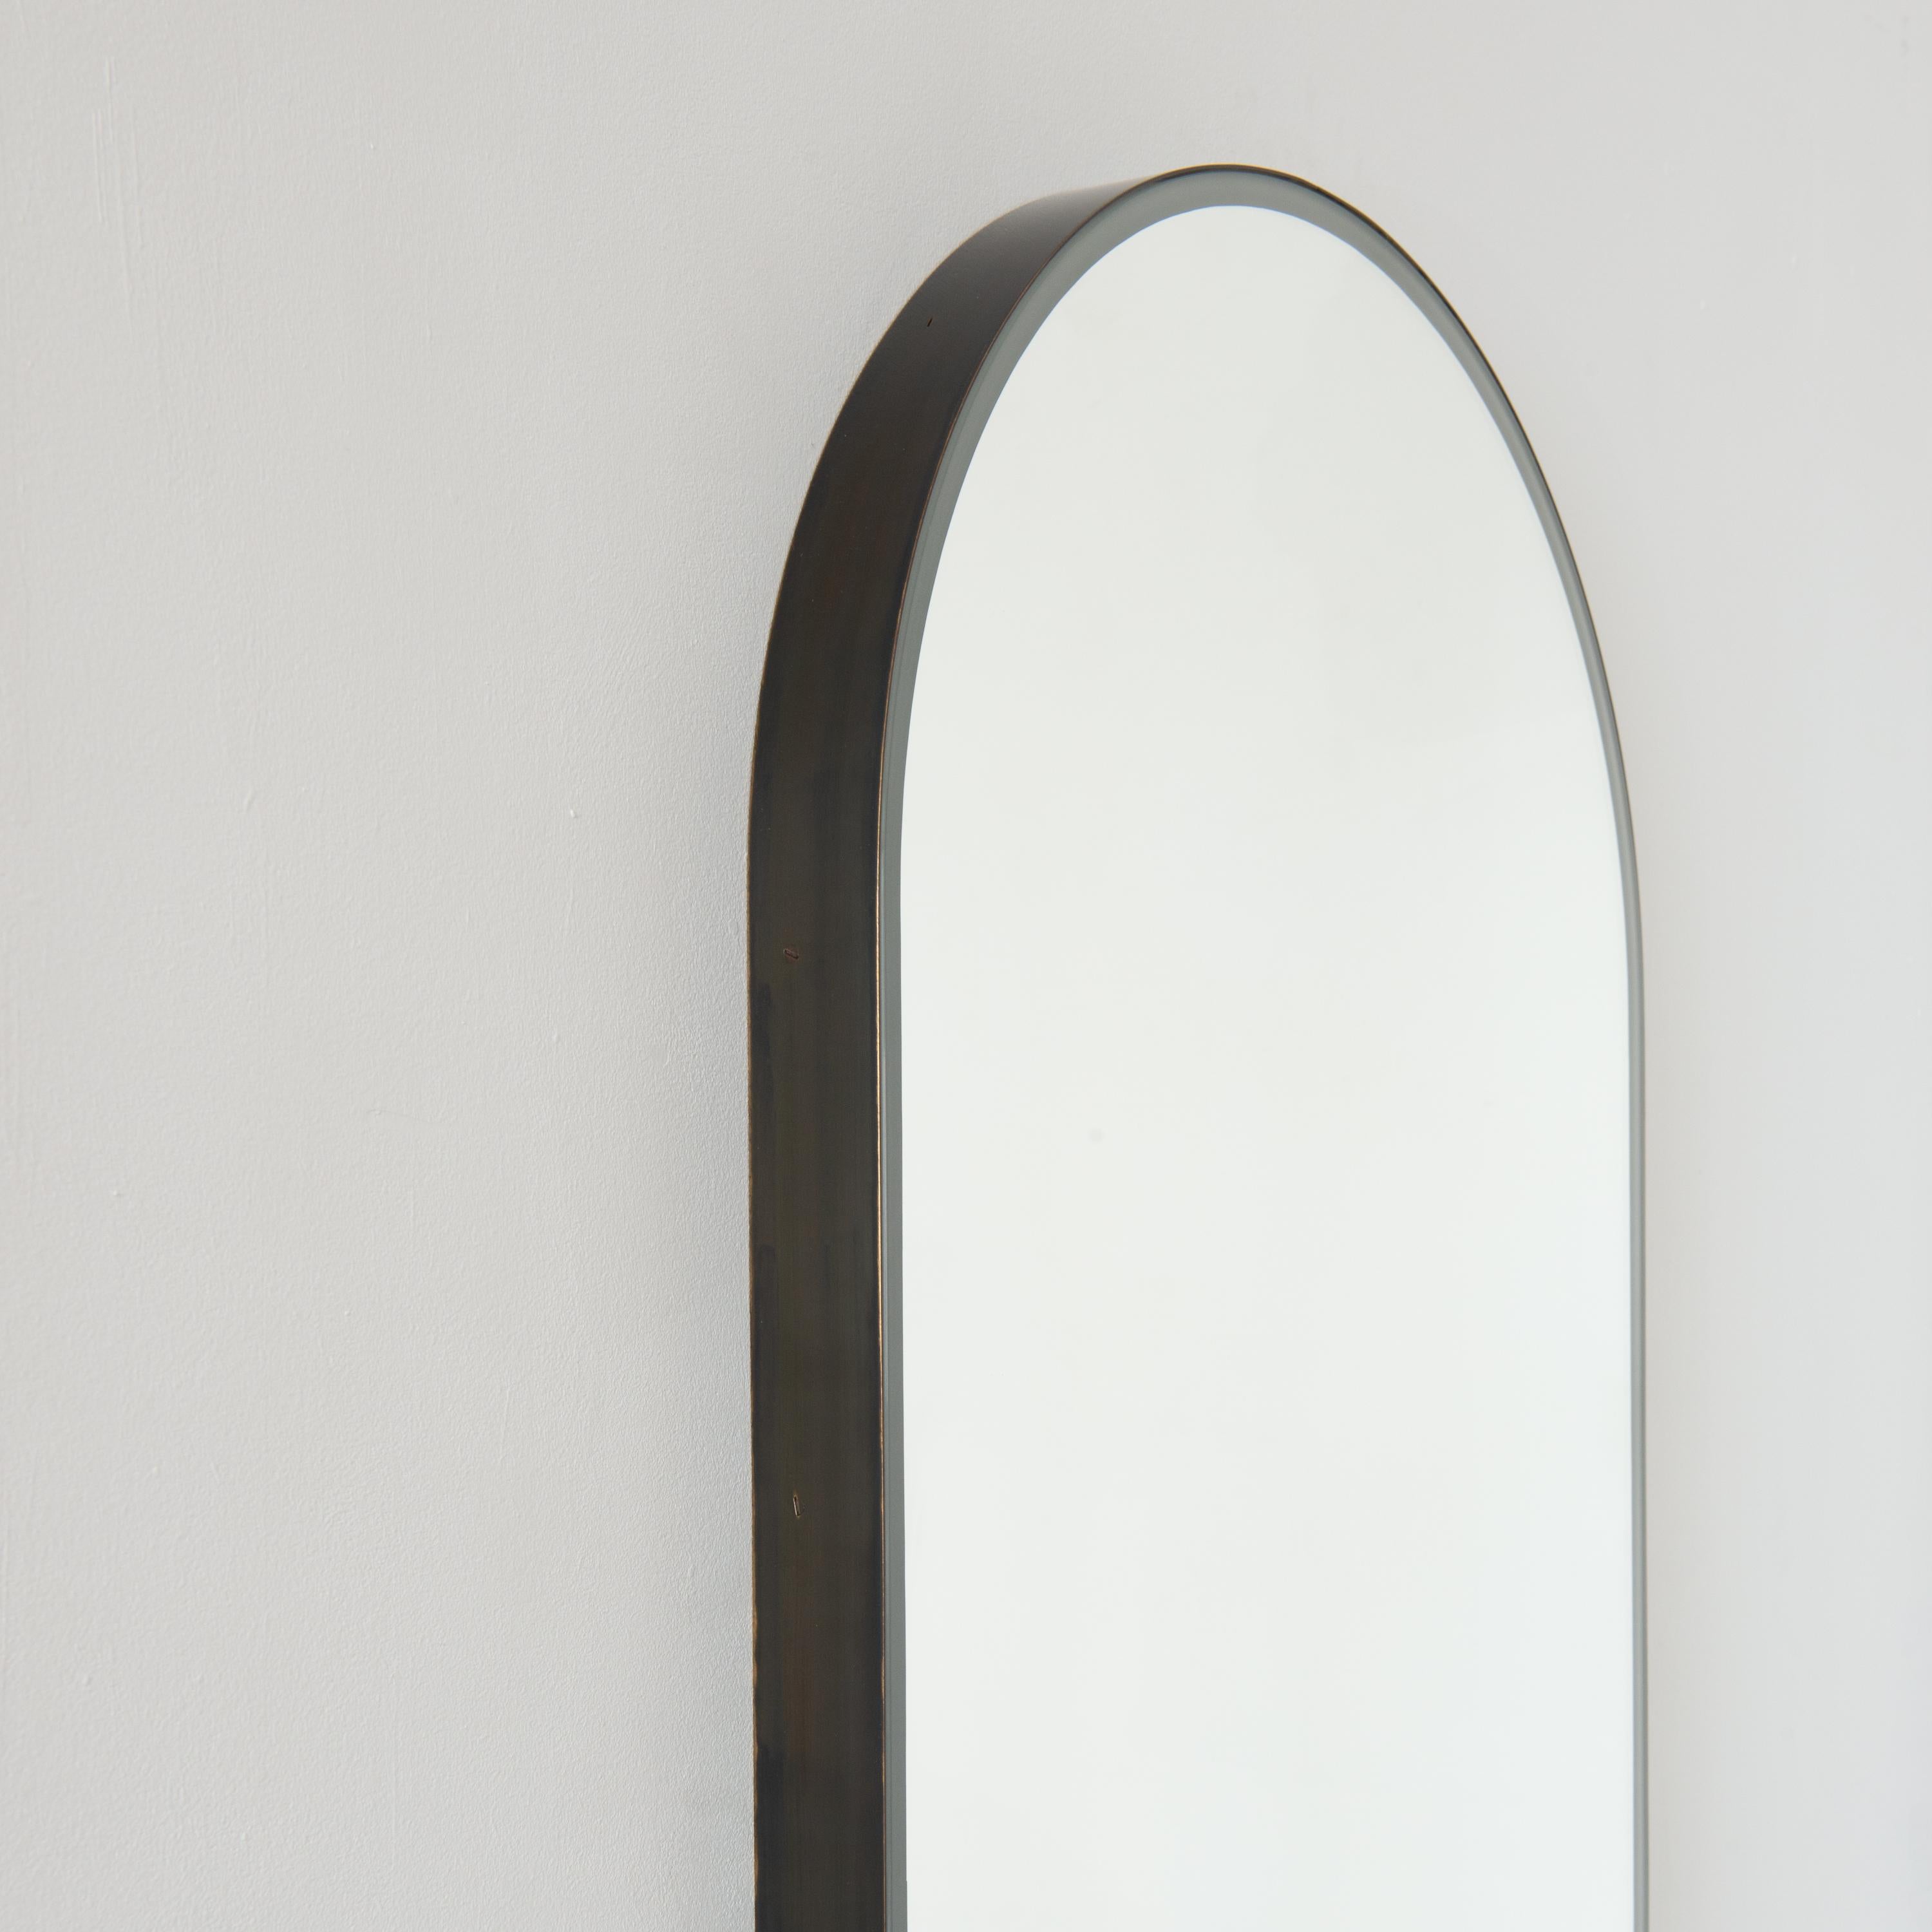 Capsula Illuminated Pill Shaped Customisable Mirror, Bronze Patina Frame, Large In New Condition For Sale In London, GB